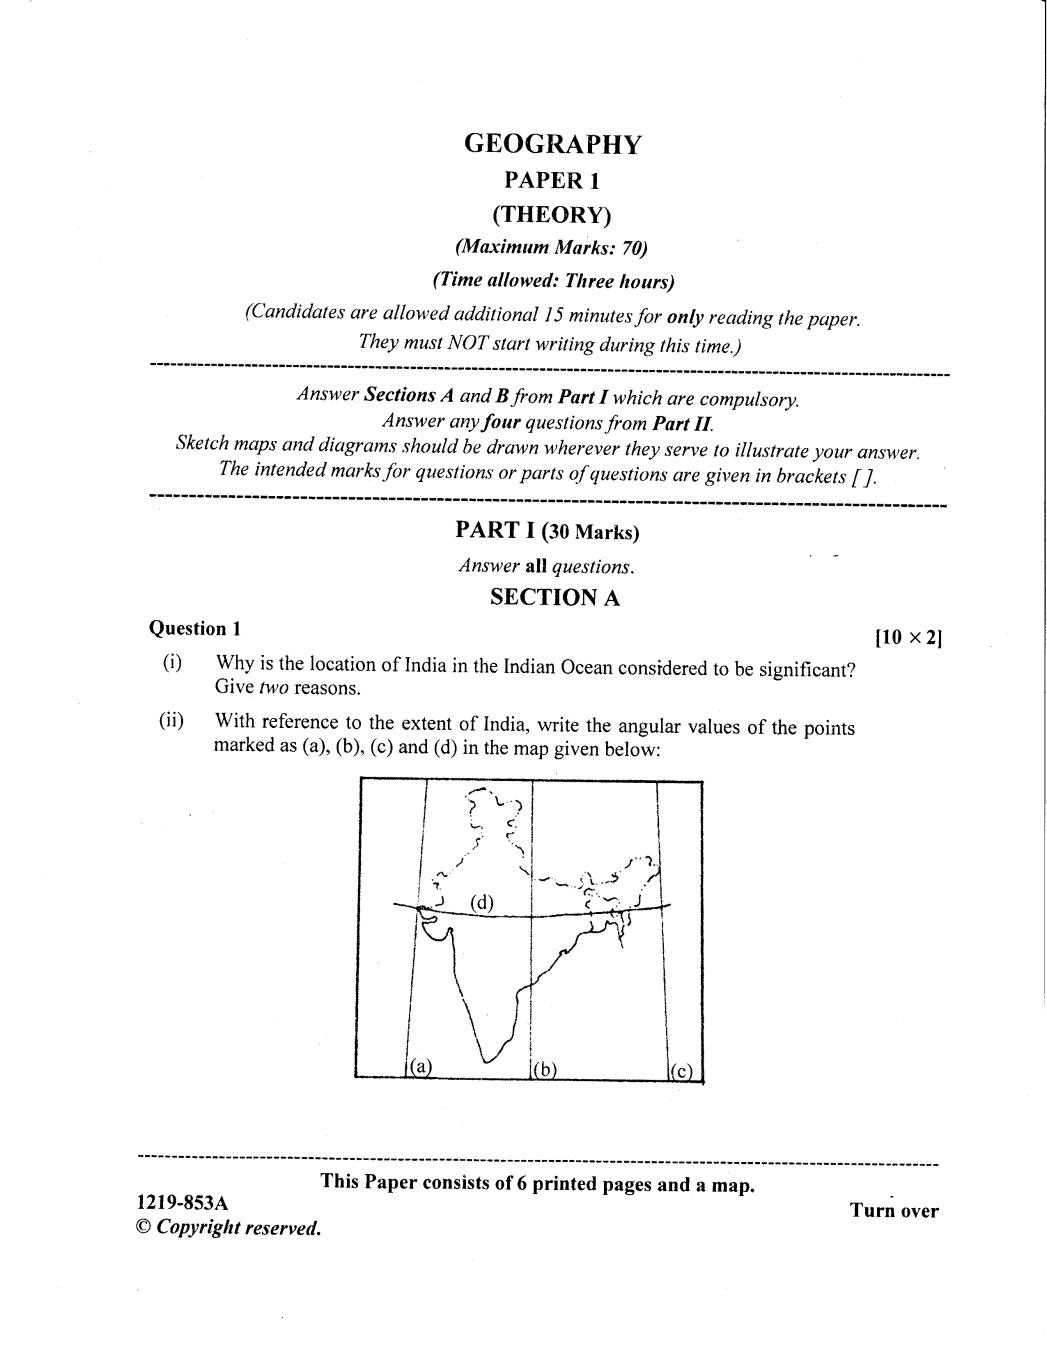 ISC Class 12 Question Paper 2019 for Geography  - Page 1